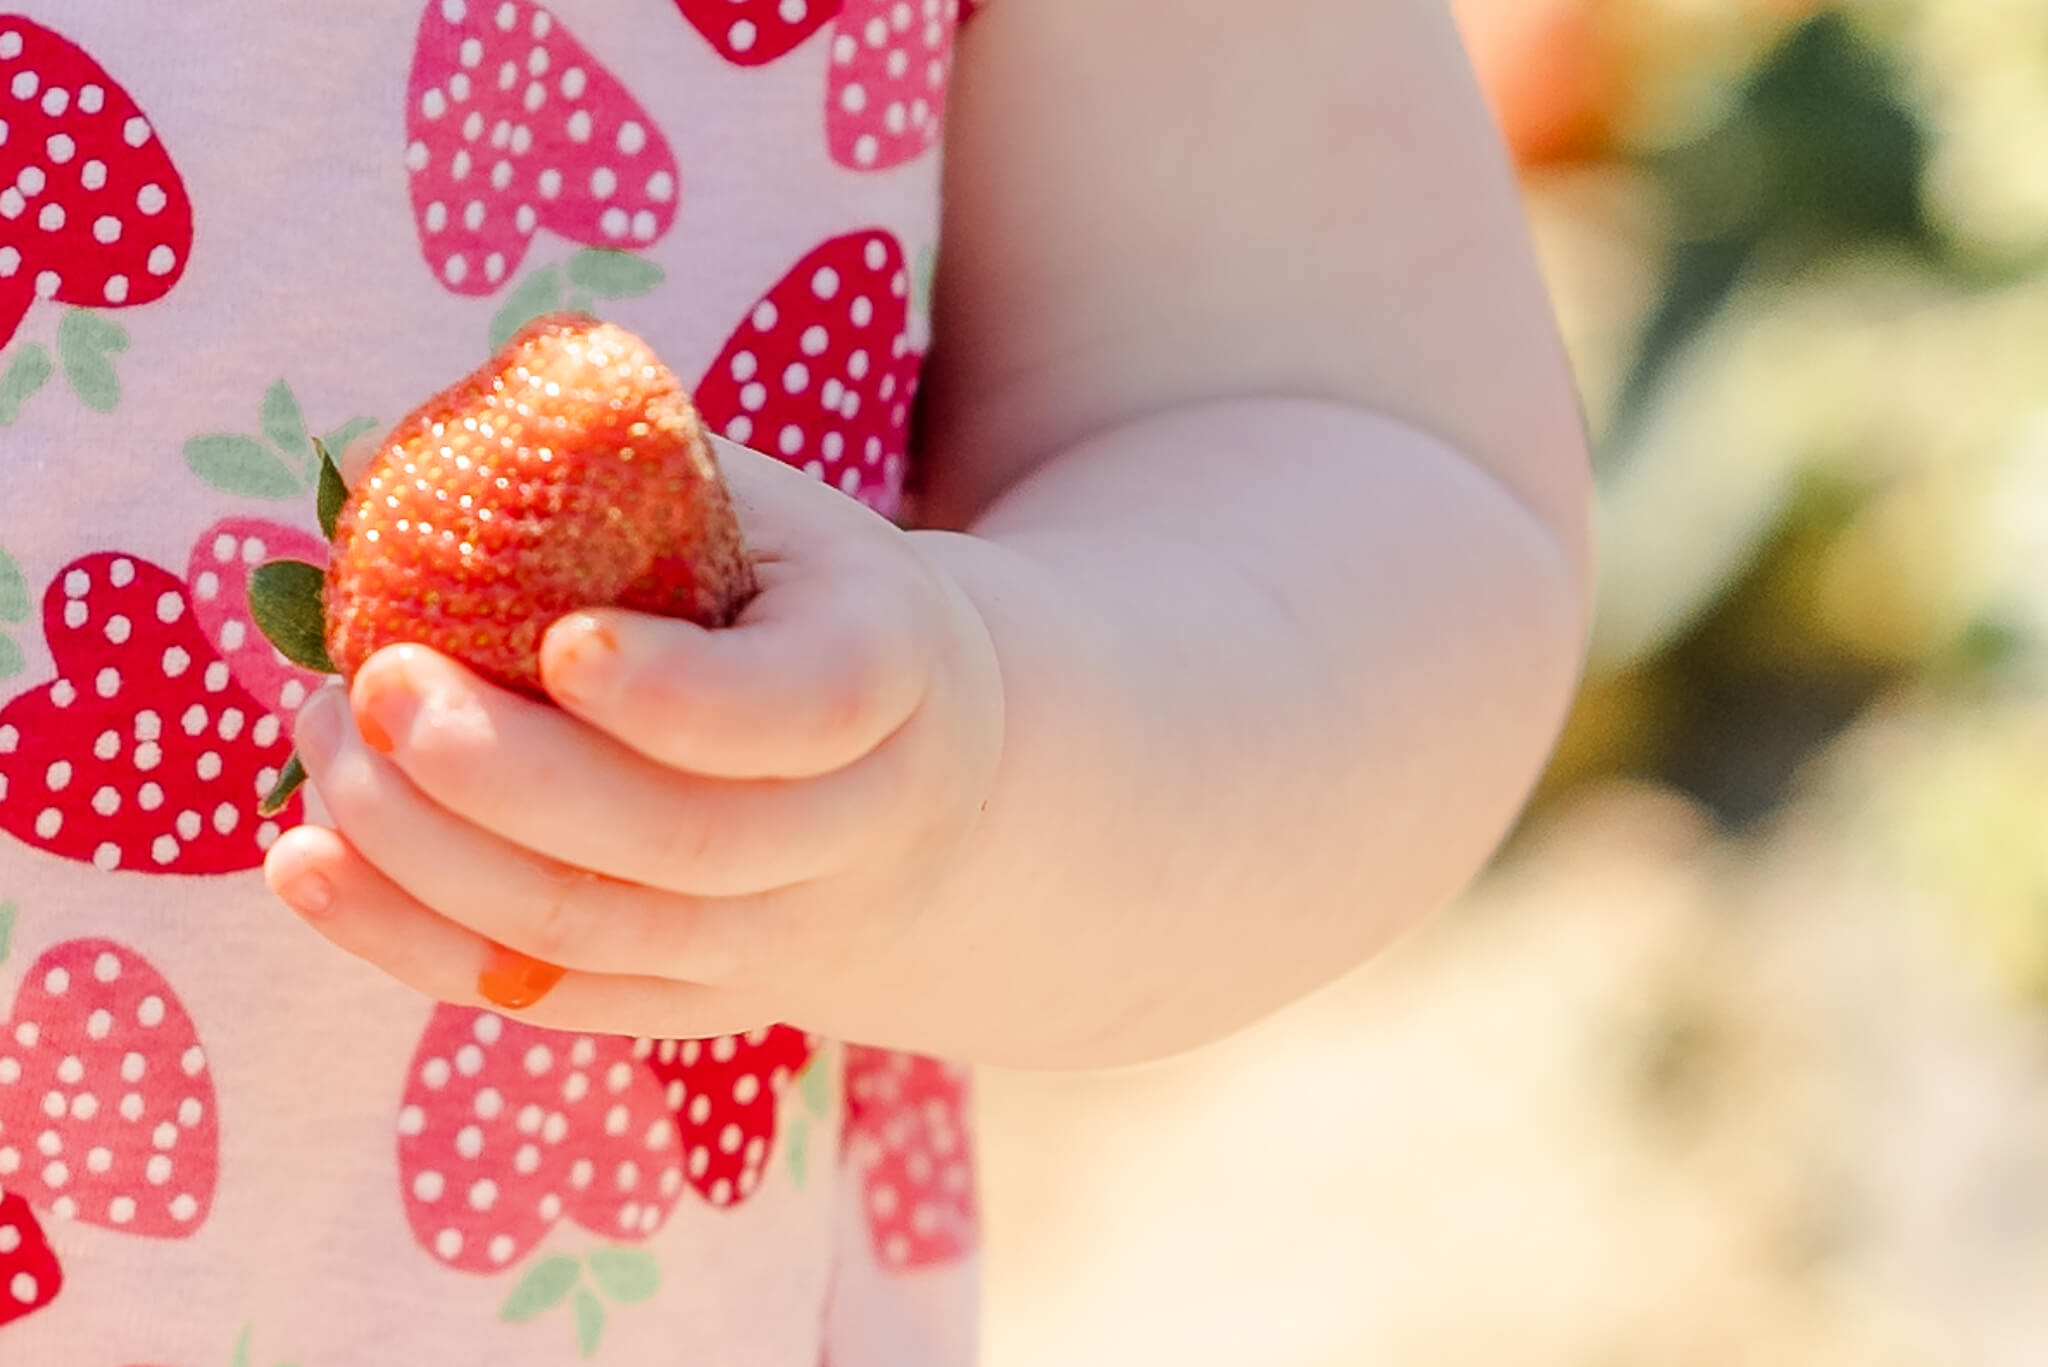 A close up of a strawberry being held by a toddler who has been picking strawberries in Chesapeake, VA.